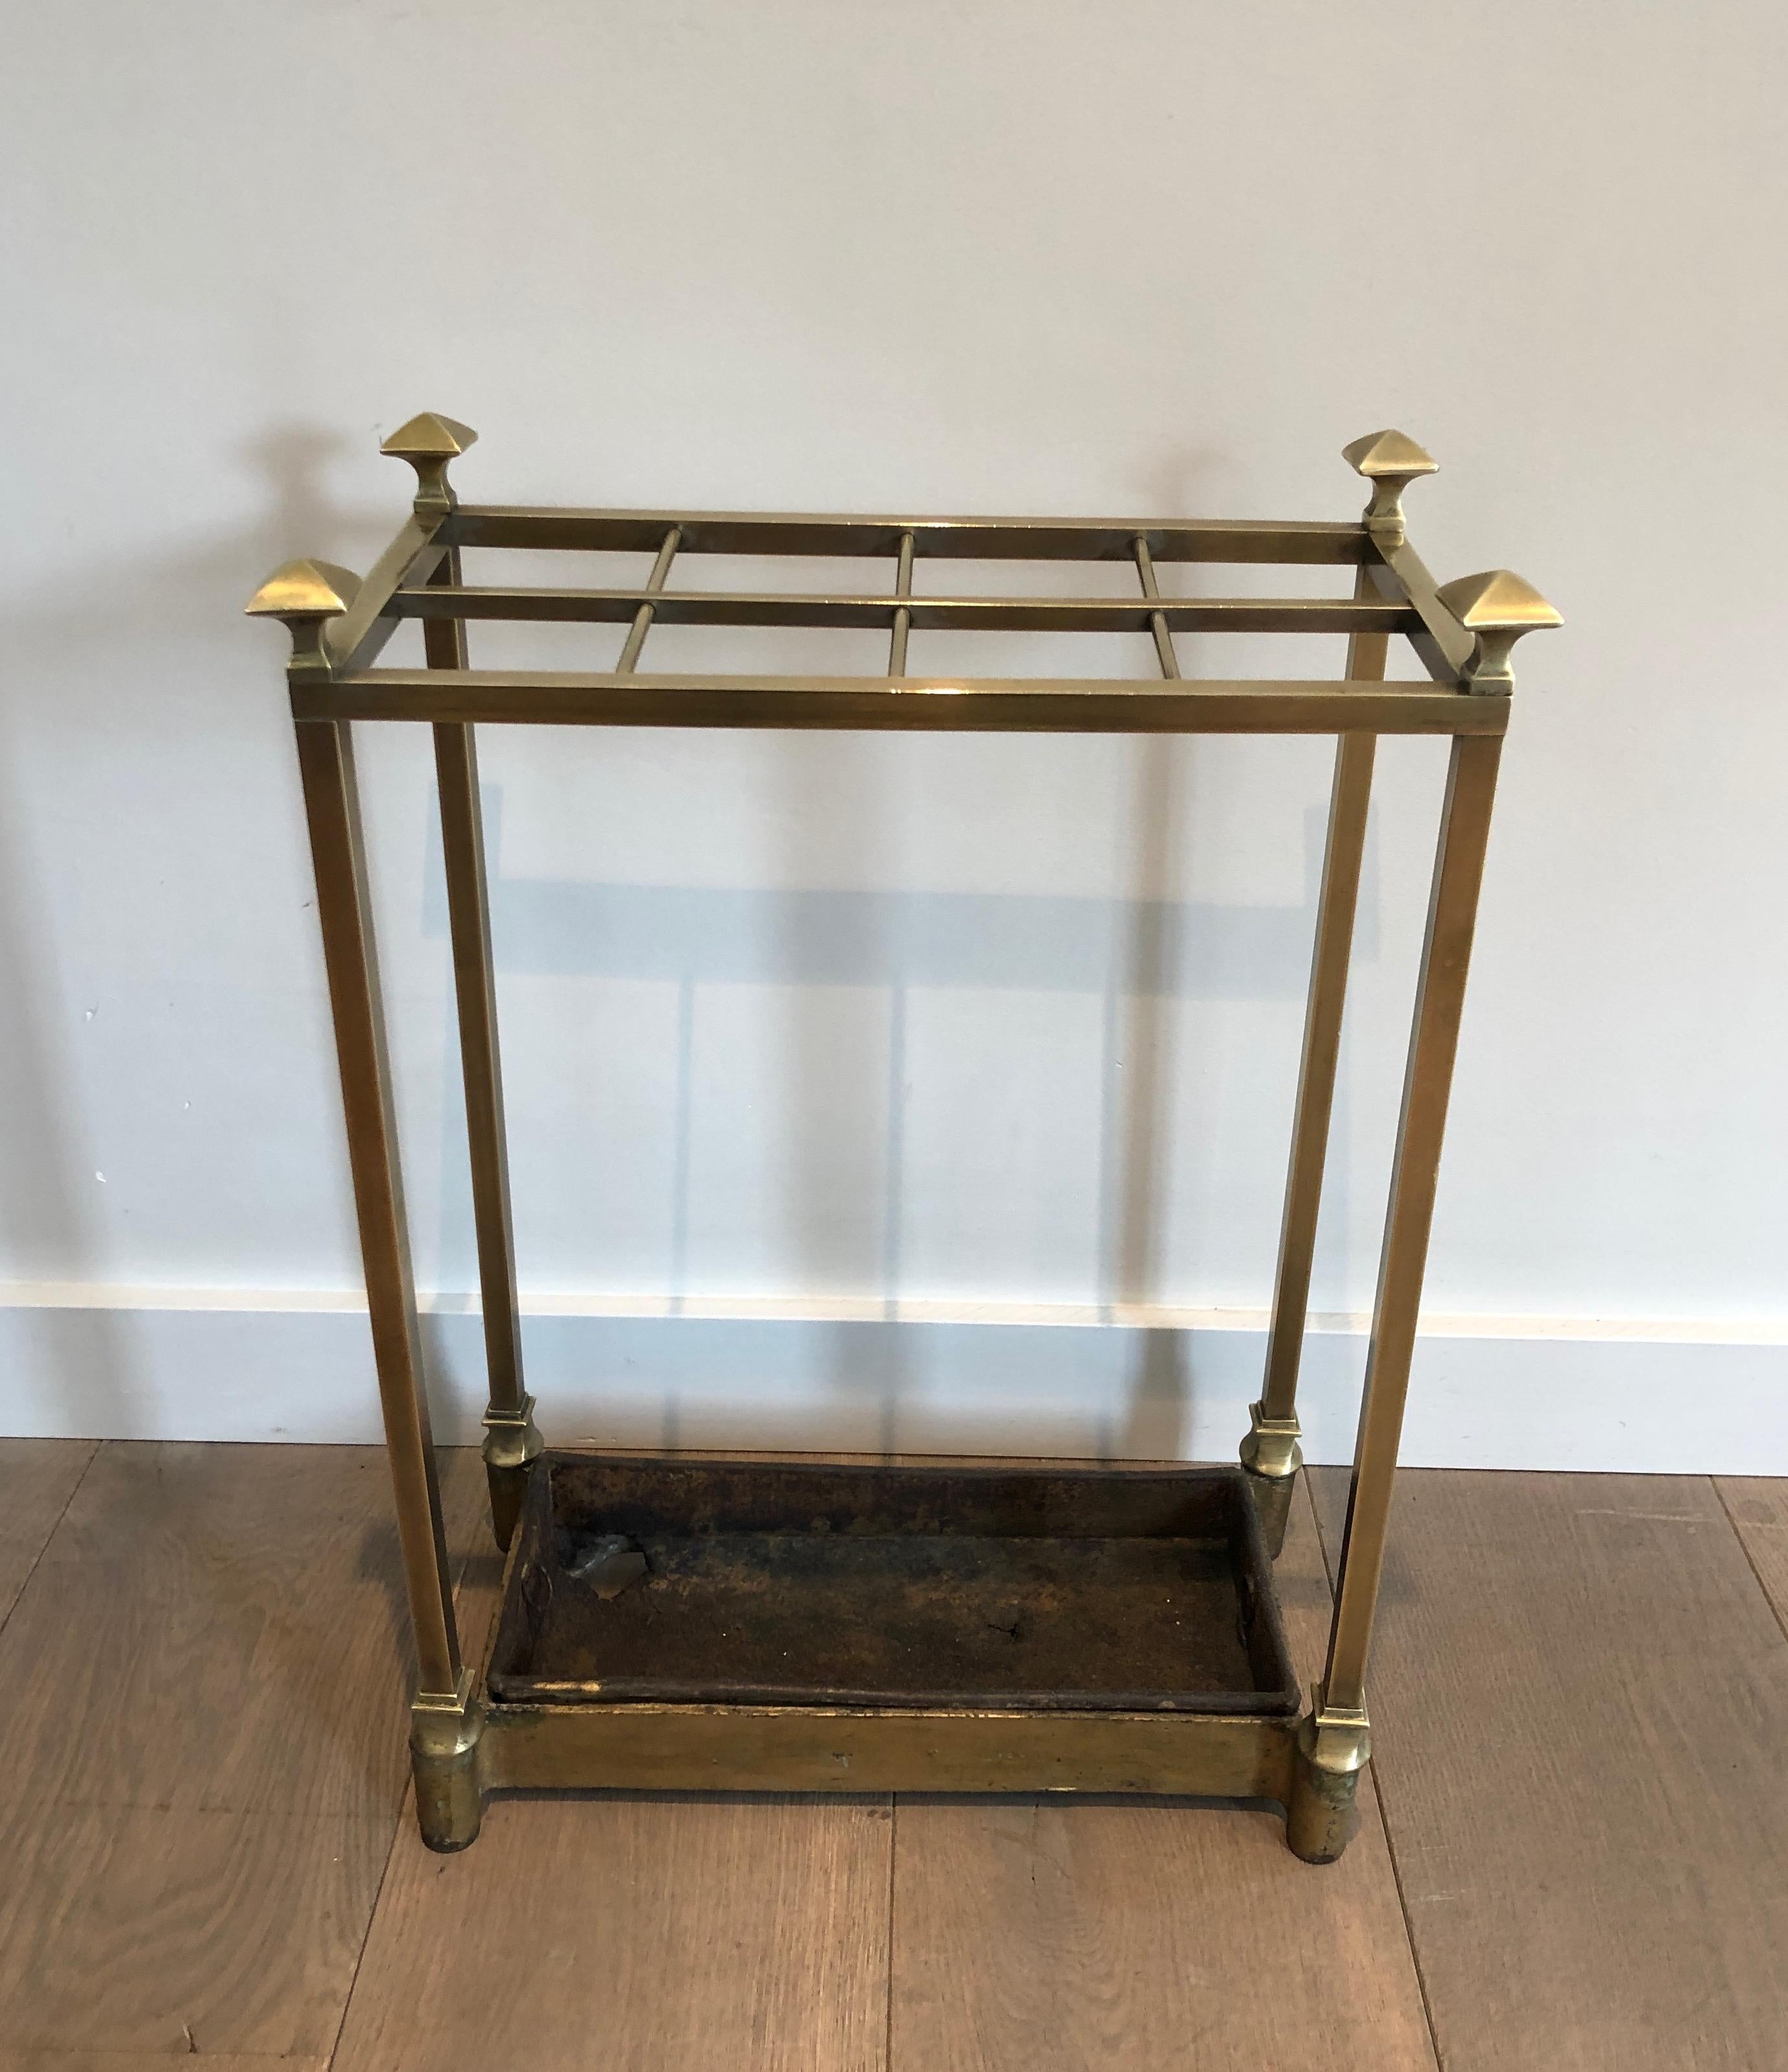 This umbrella stand is made of brass with a black metal part on the base. This is a French work, circa 1900.